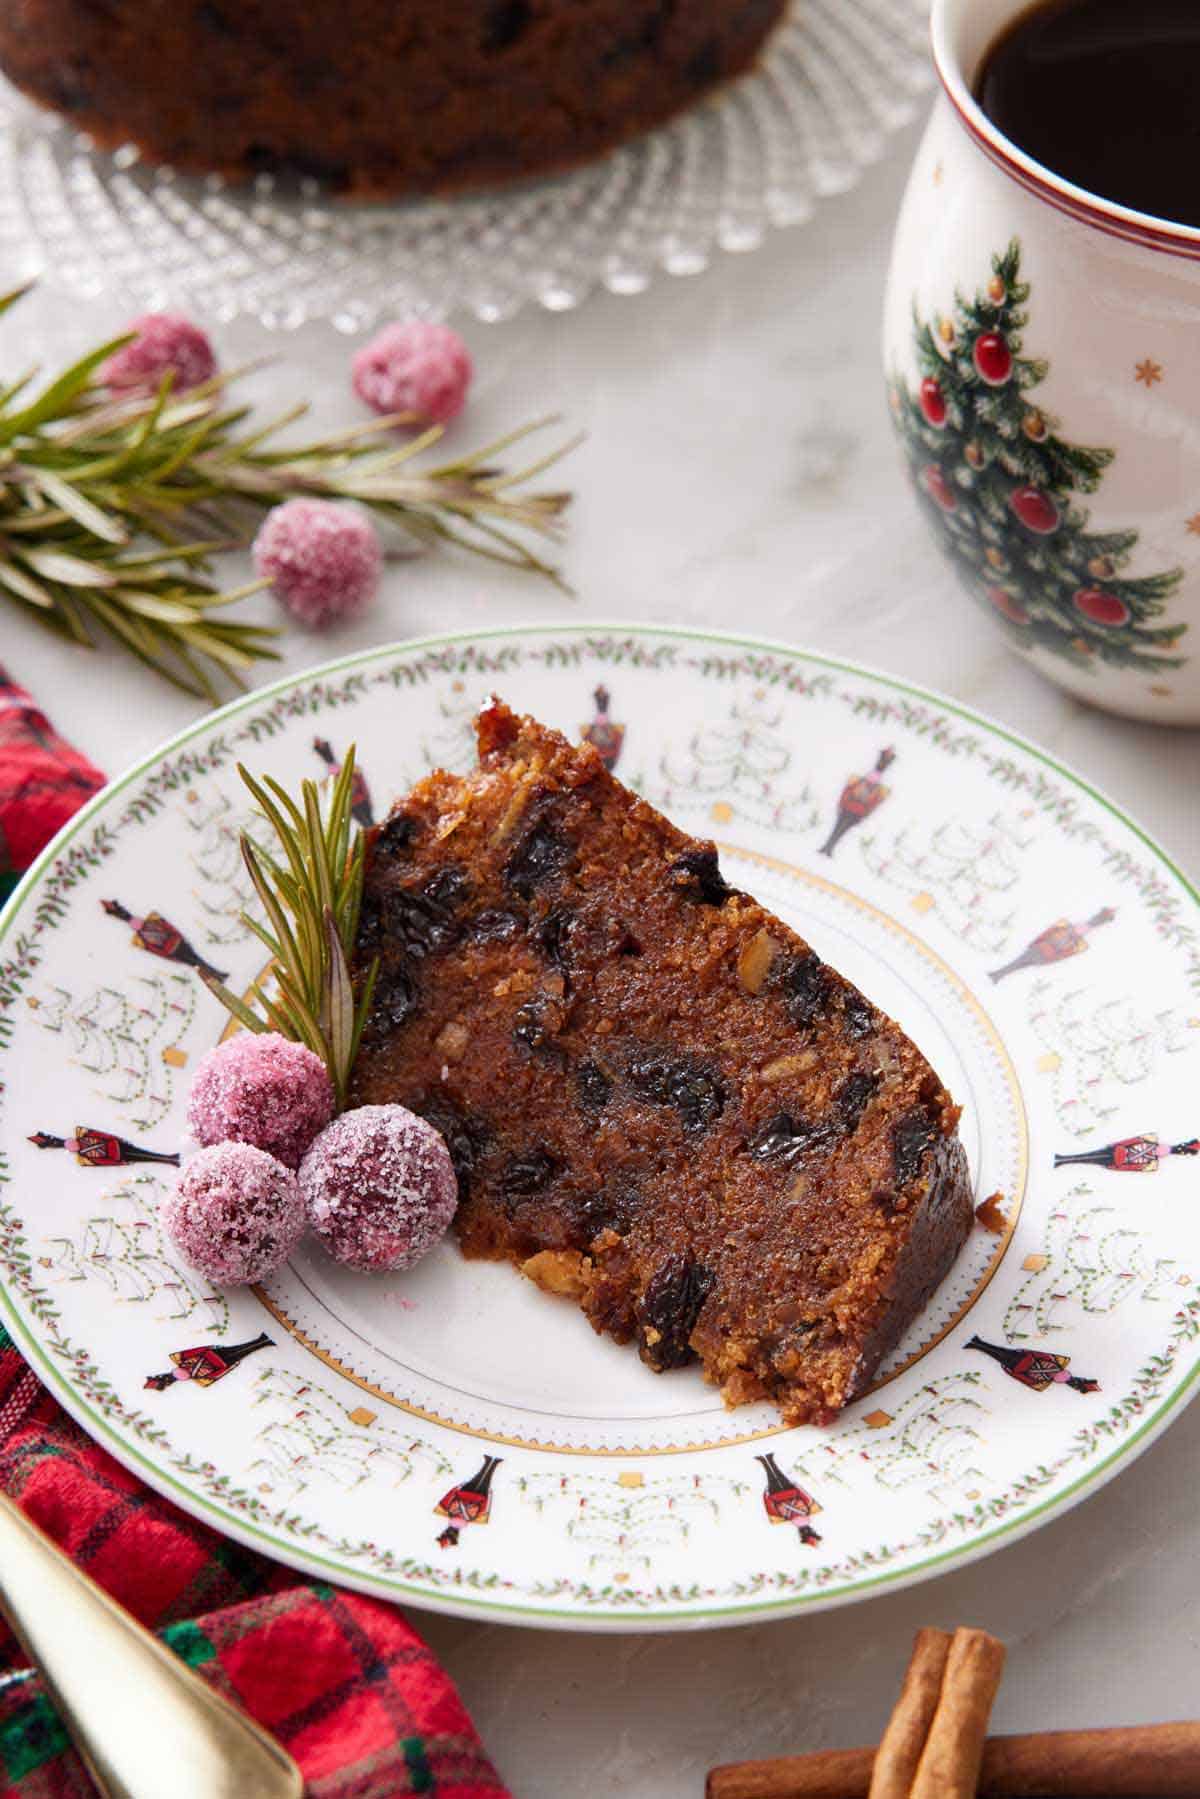 A plate with a slice of Christmas pudding with some sugared cranberries and rosemary on the side. A mug of coffee in the background.